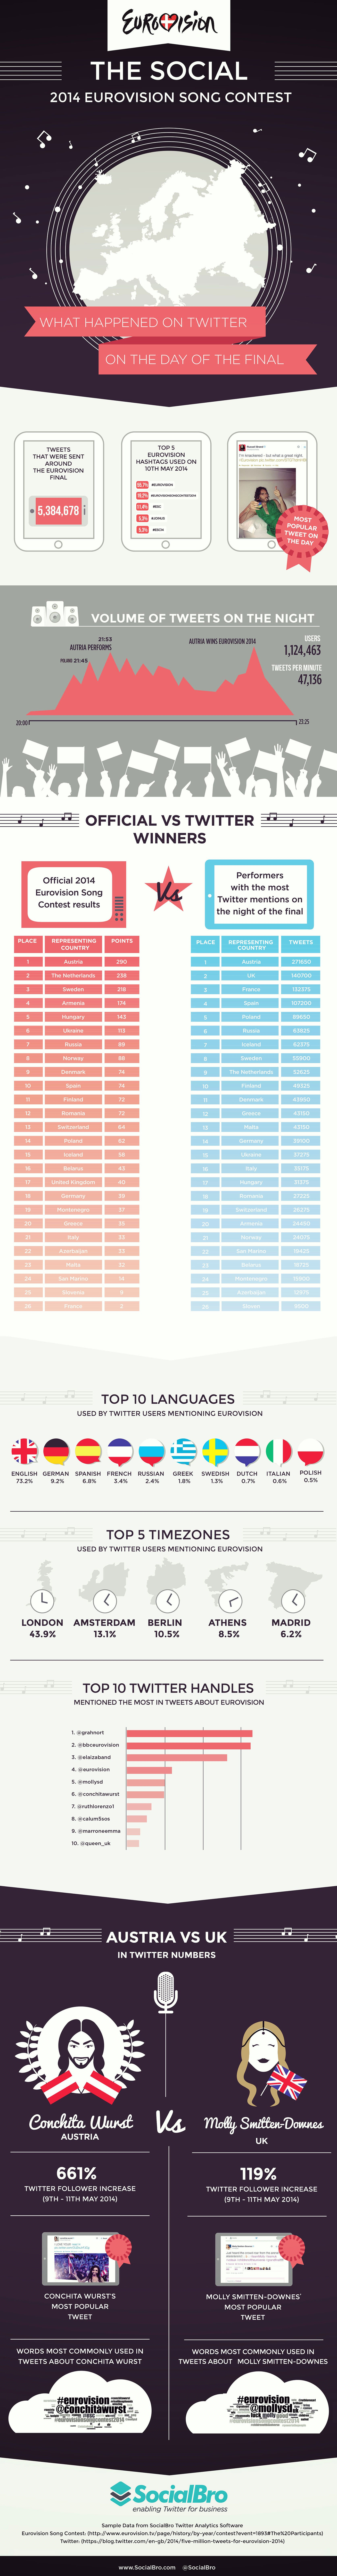 eurovision_infographic_Eng